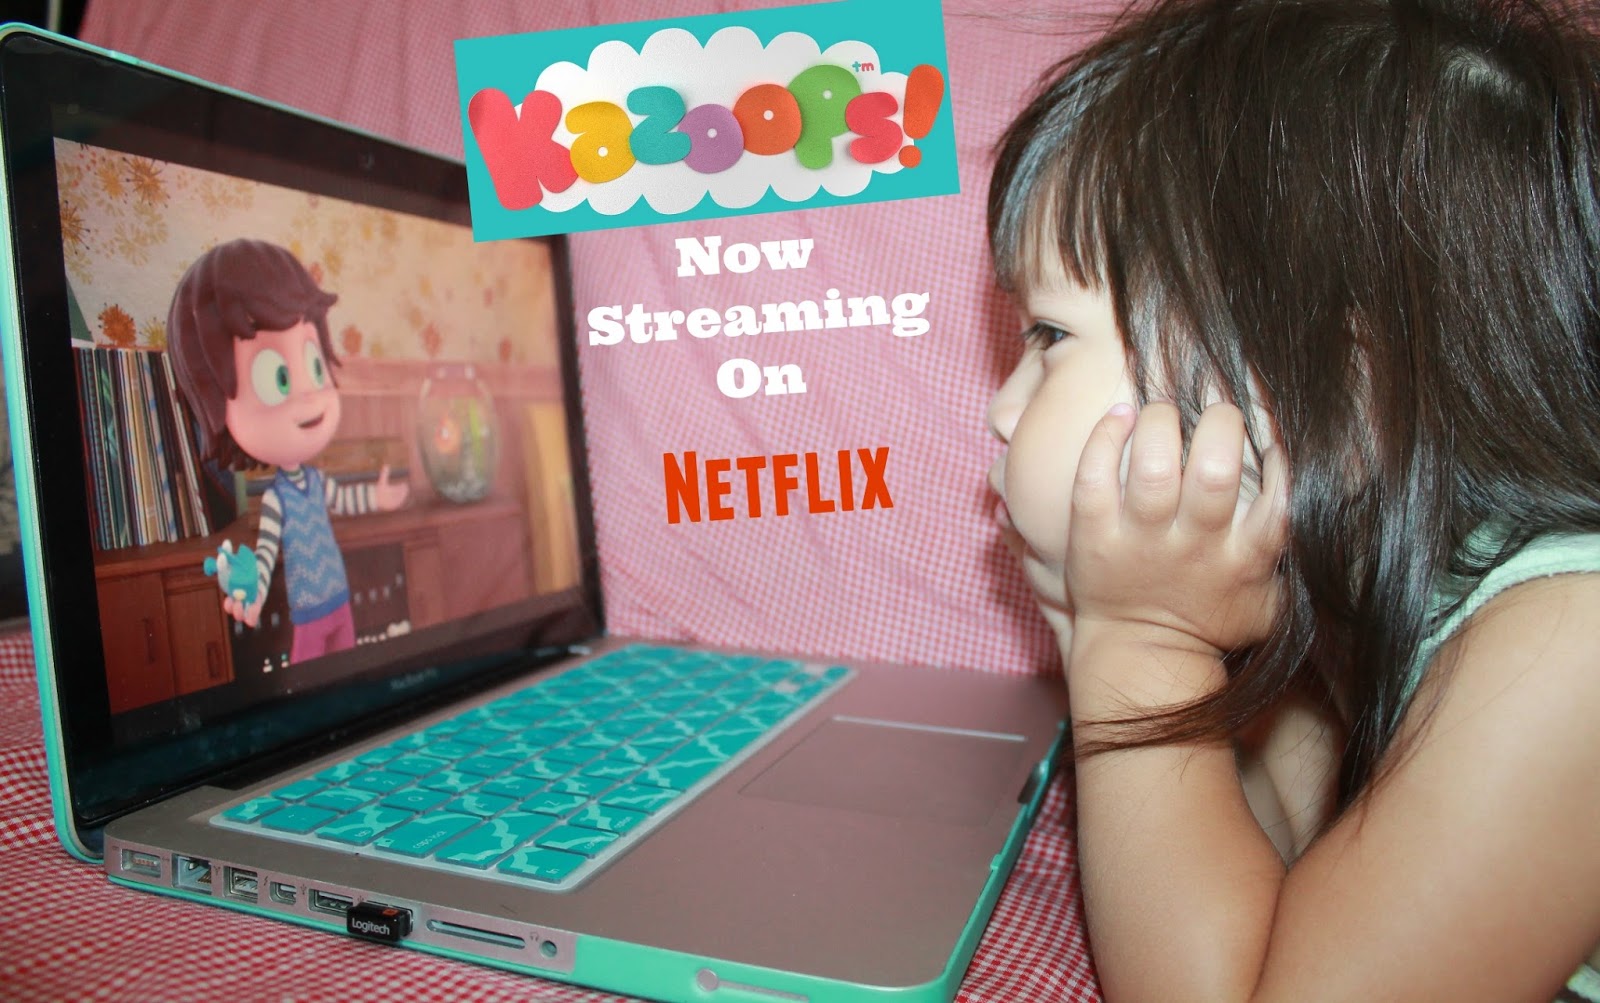 Kazoops New Pre-school Show Now Streaming on Netflix!